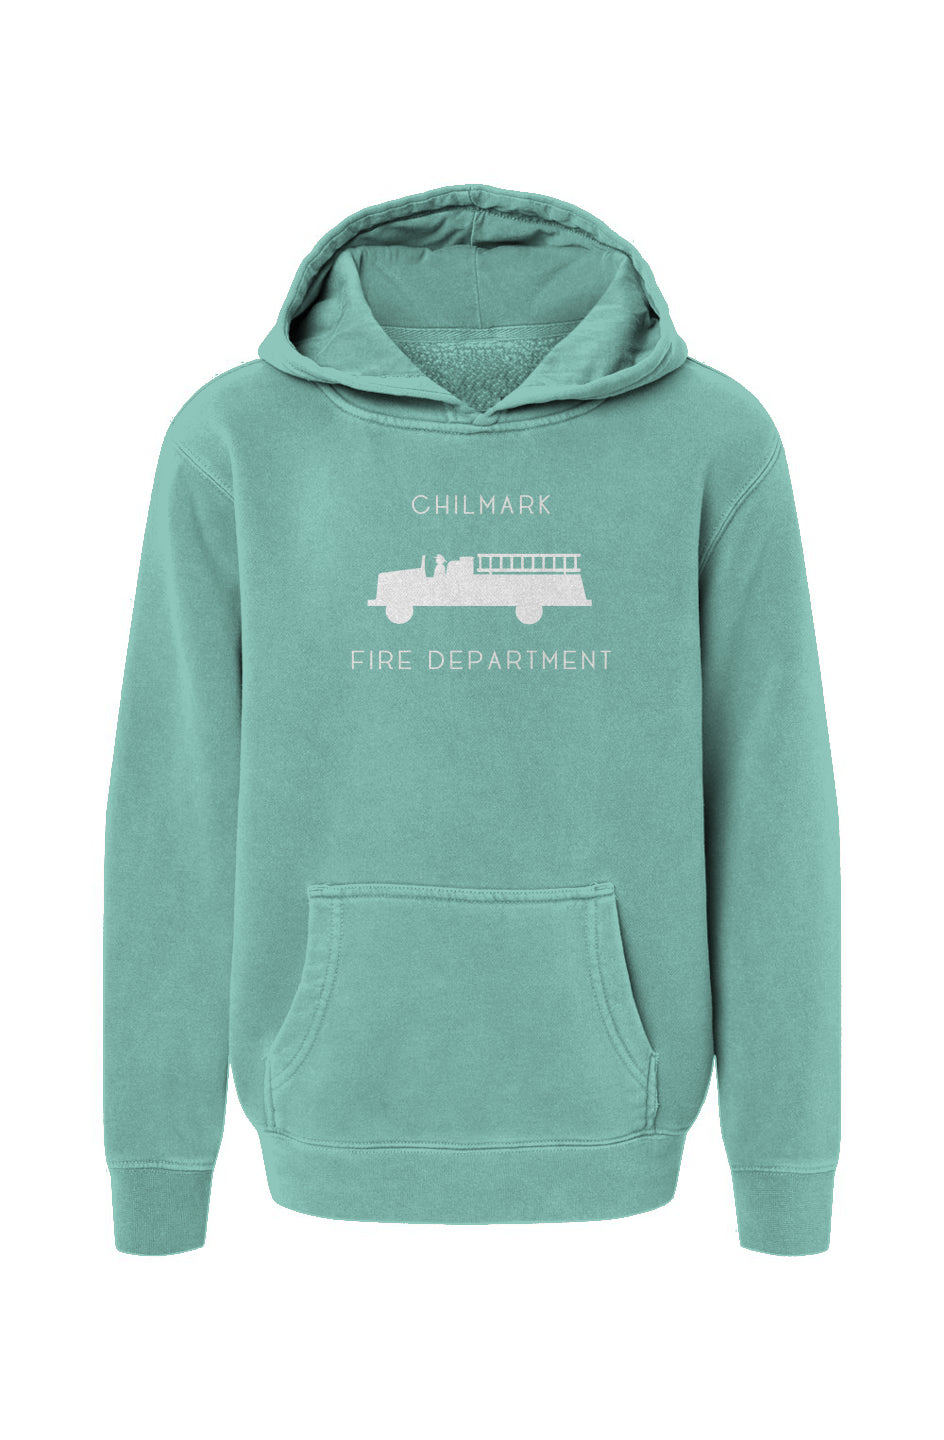 Chilmark Fire Department Youth Hoodie